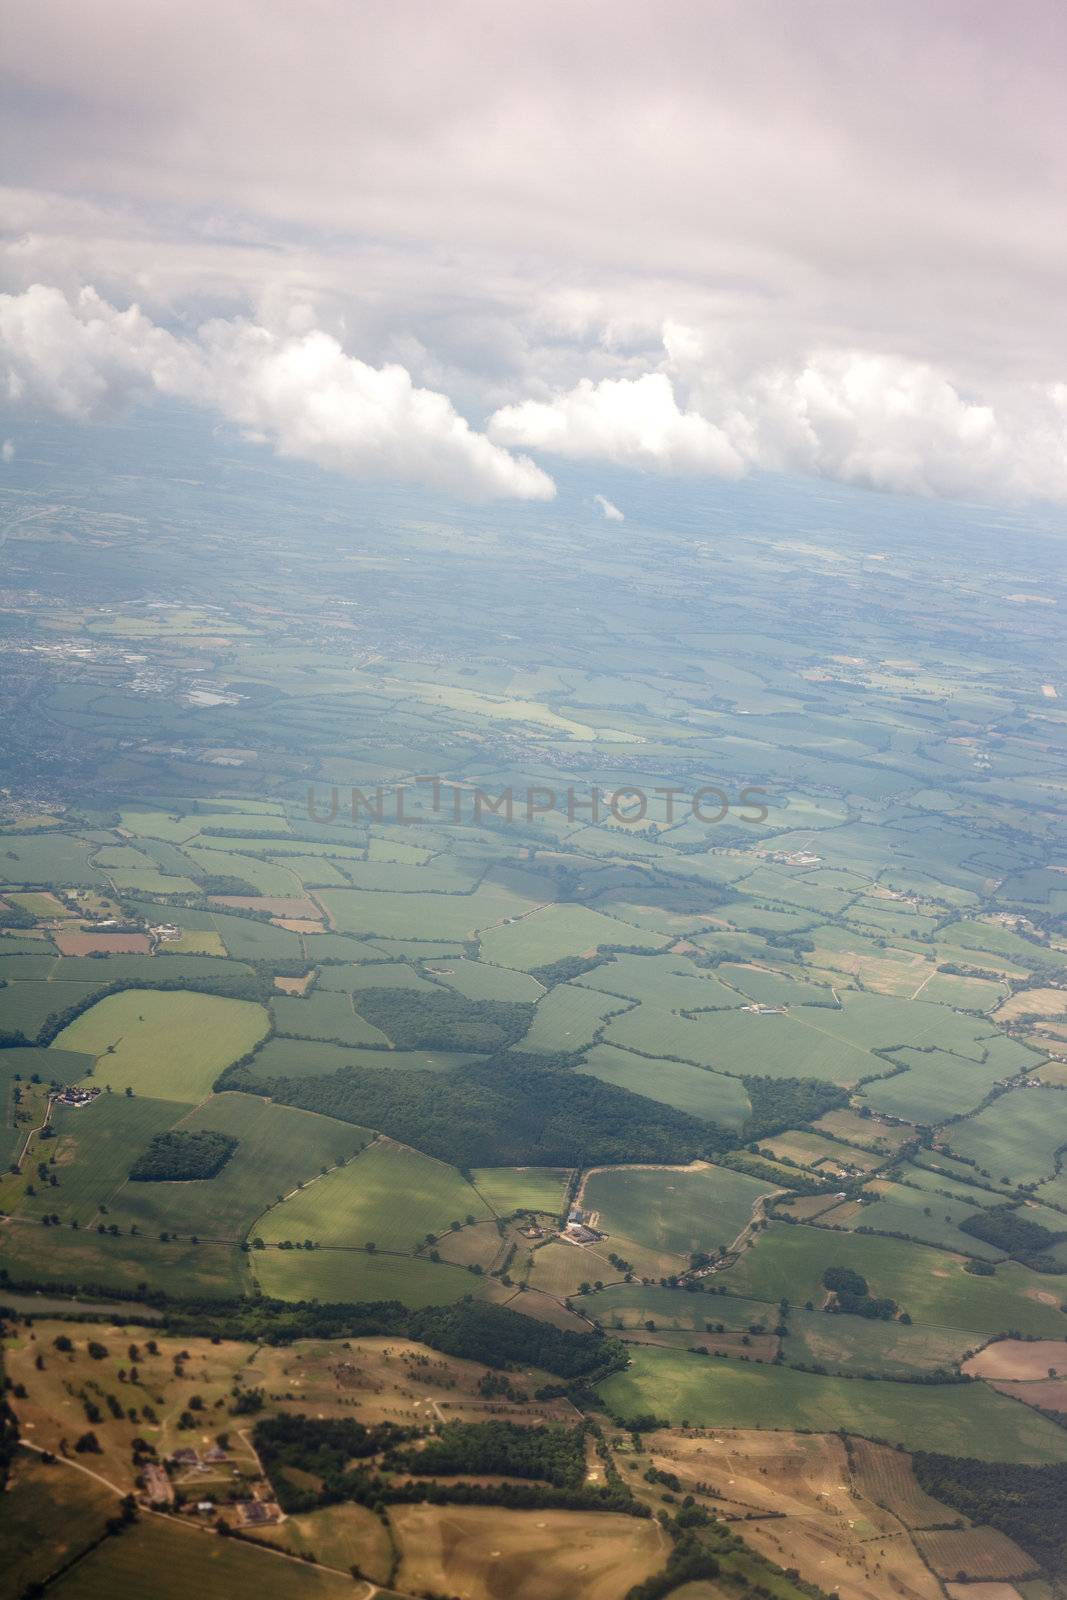 Aerial view of farmland area landscape from airplane. Photo taken near Stansted (London) airport